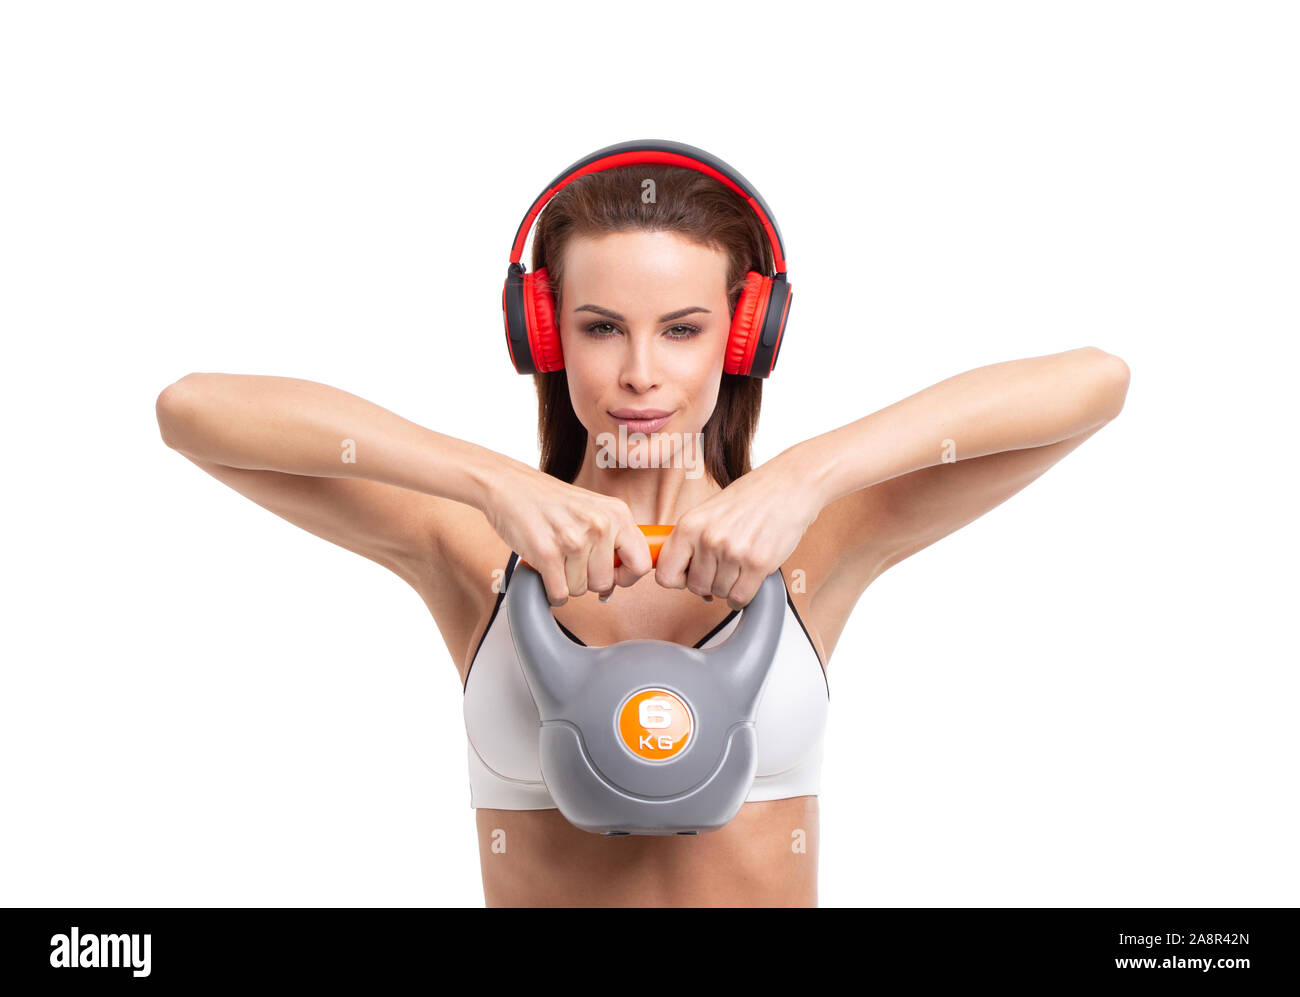 Women's Sport Wear, Gym Fashion And Accessories, Exercise Equipment,  Healthy Lifestyle Concept, Armband, Headphone. Stock Photo, Picture and  Royalty Free Image. Image 78694899.